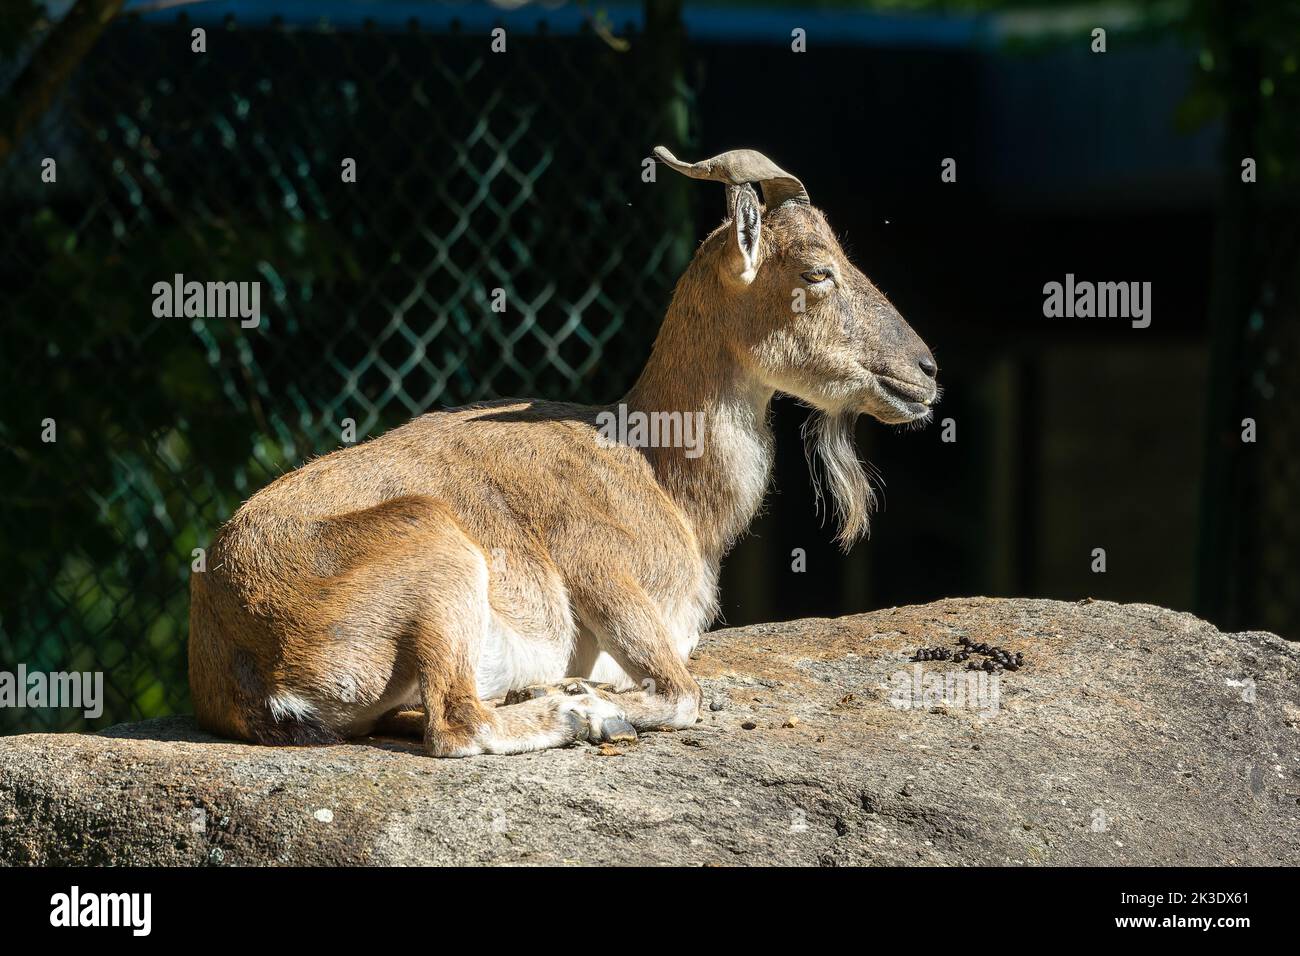 Turkmenian markhor, Capra falconeri heptneri. The name of this species comes from the shape of horns, twisting like a corkscrew or screw. Markhor is o Stock Photo